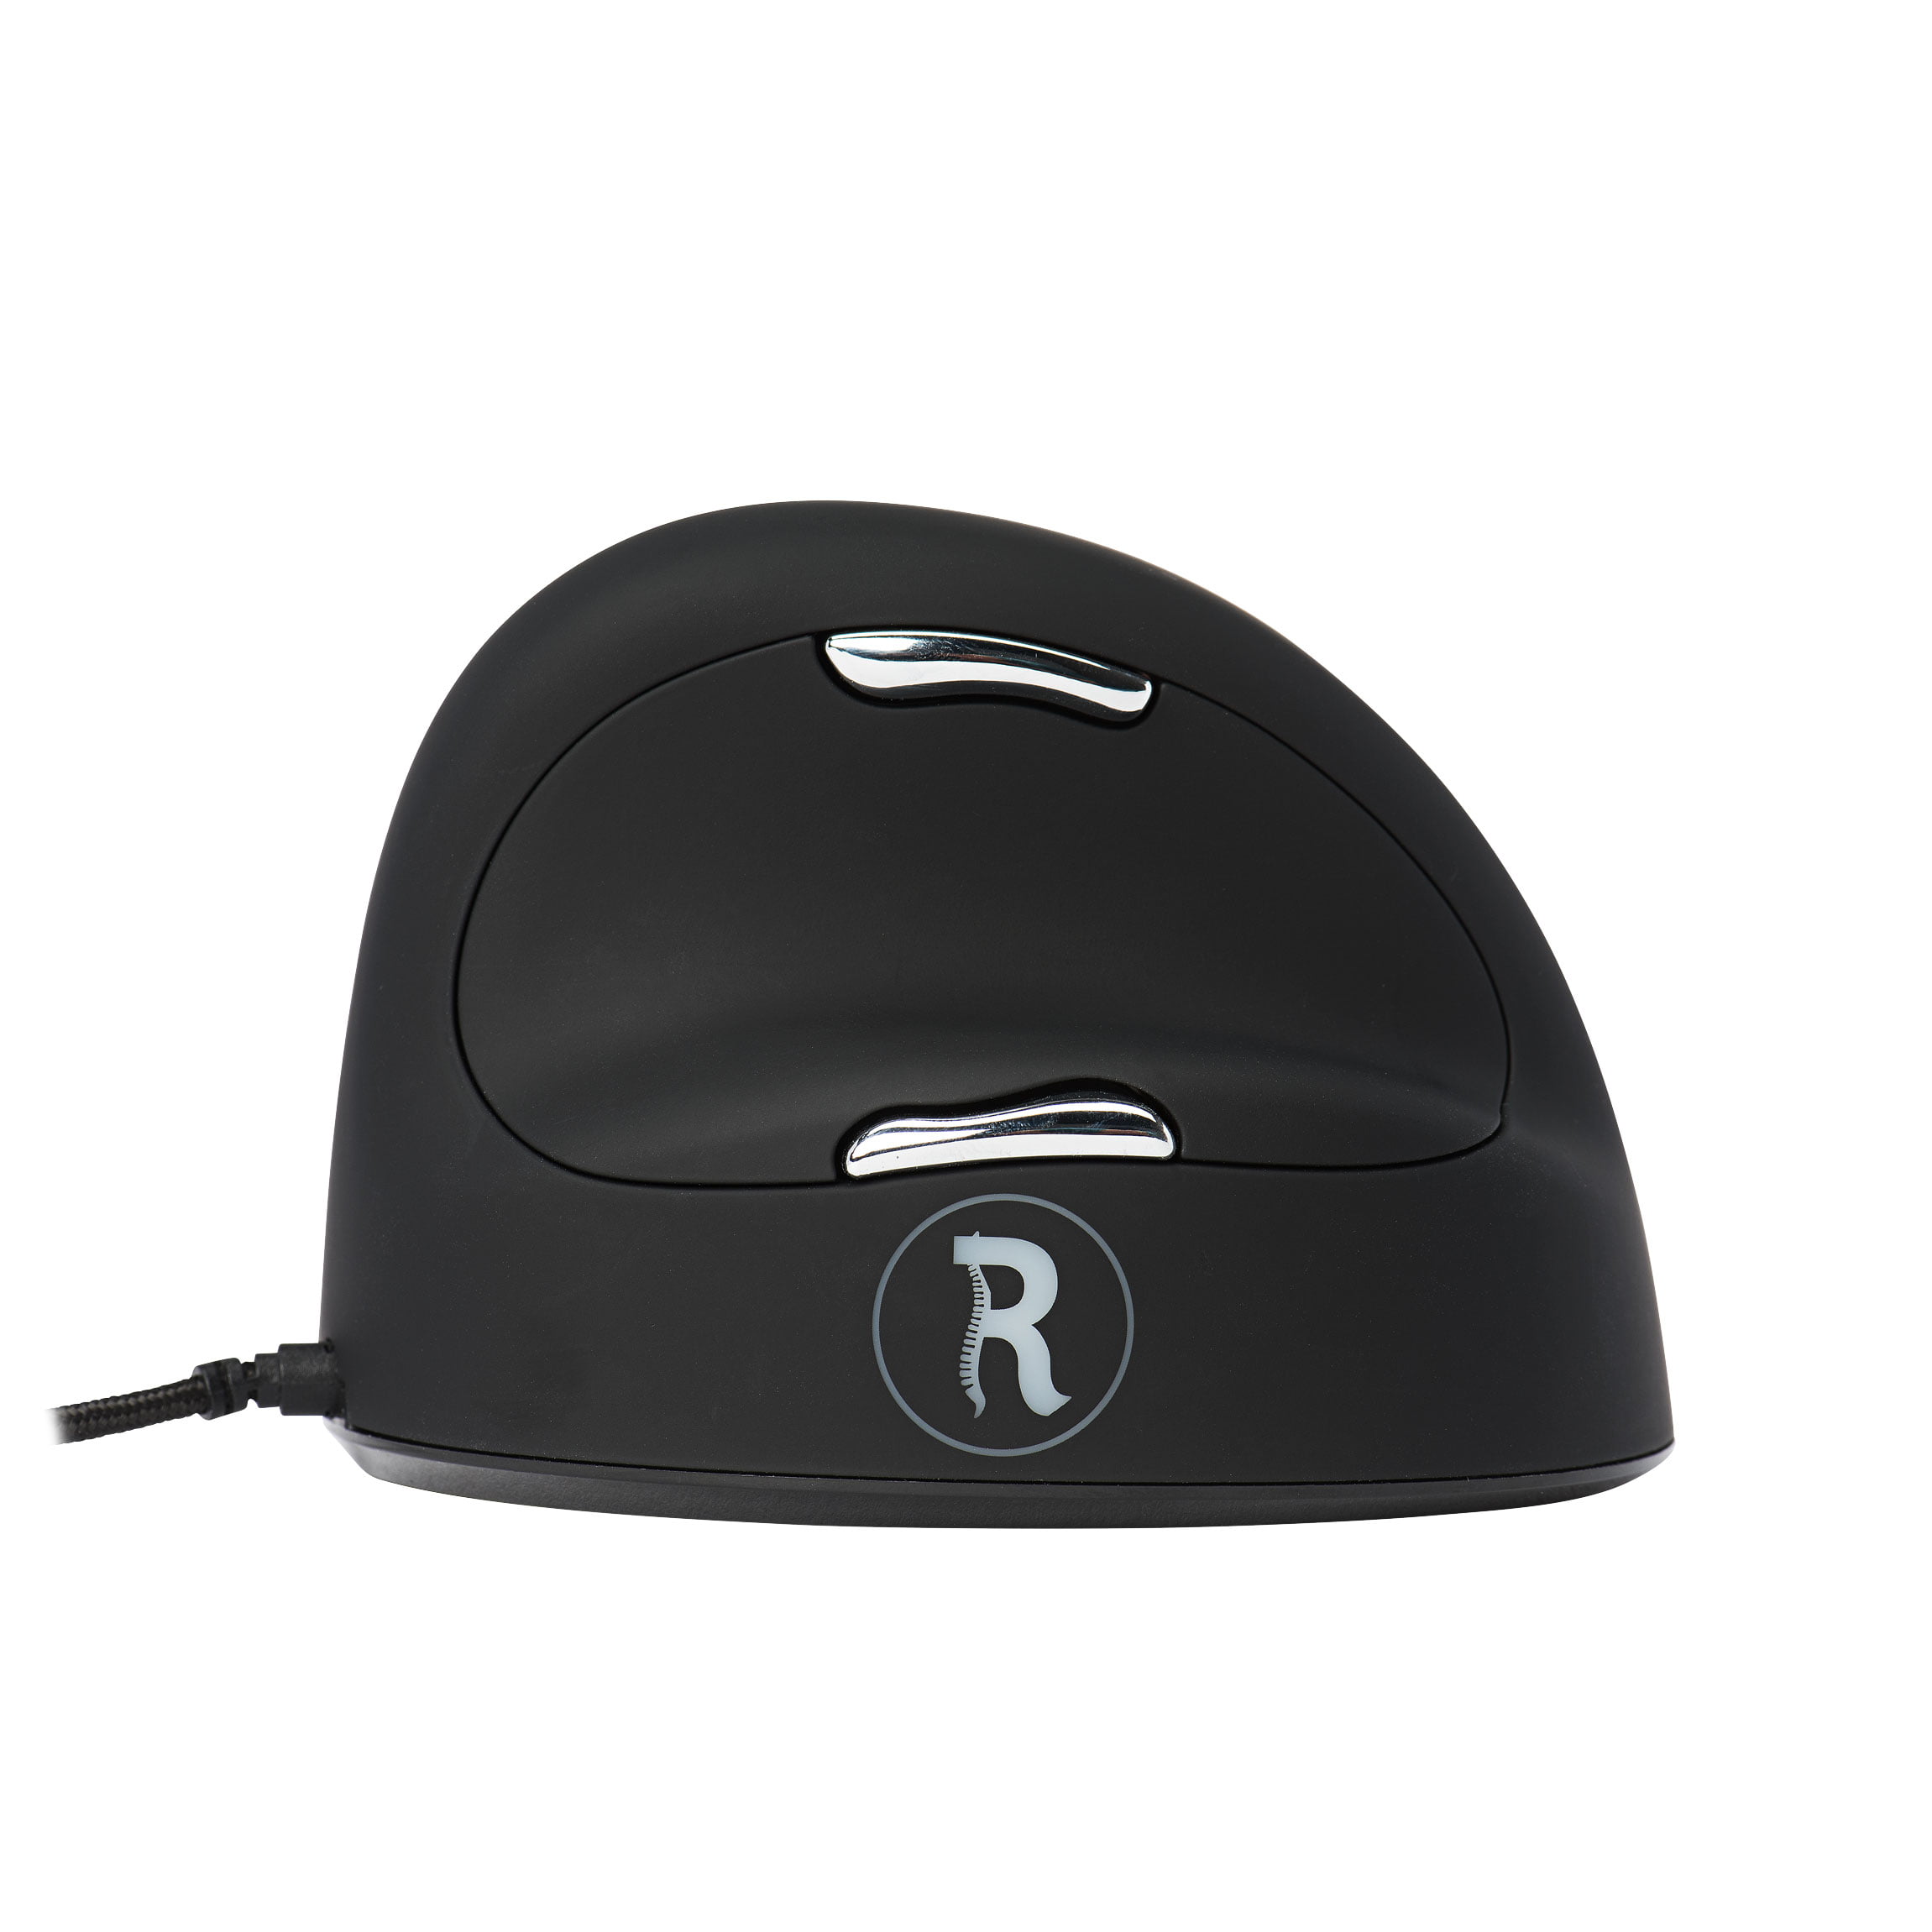 R-Go Tools USB Wired Vertical Ergonomic Mouse, Large(Hand Size